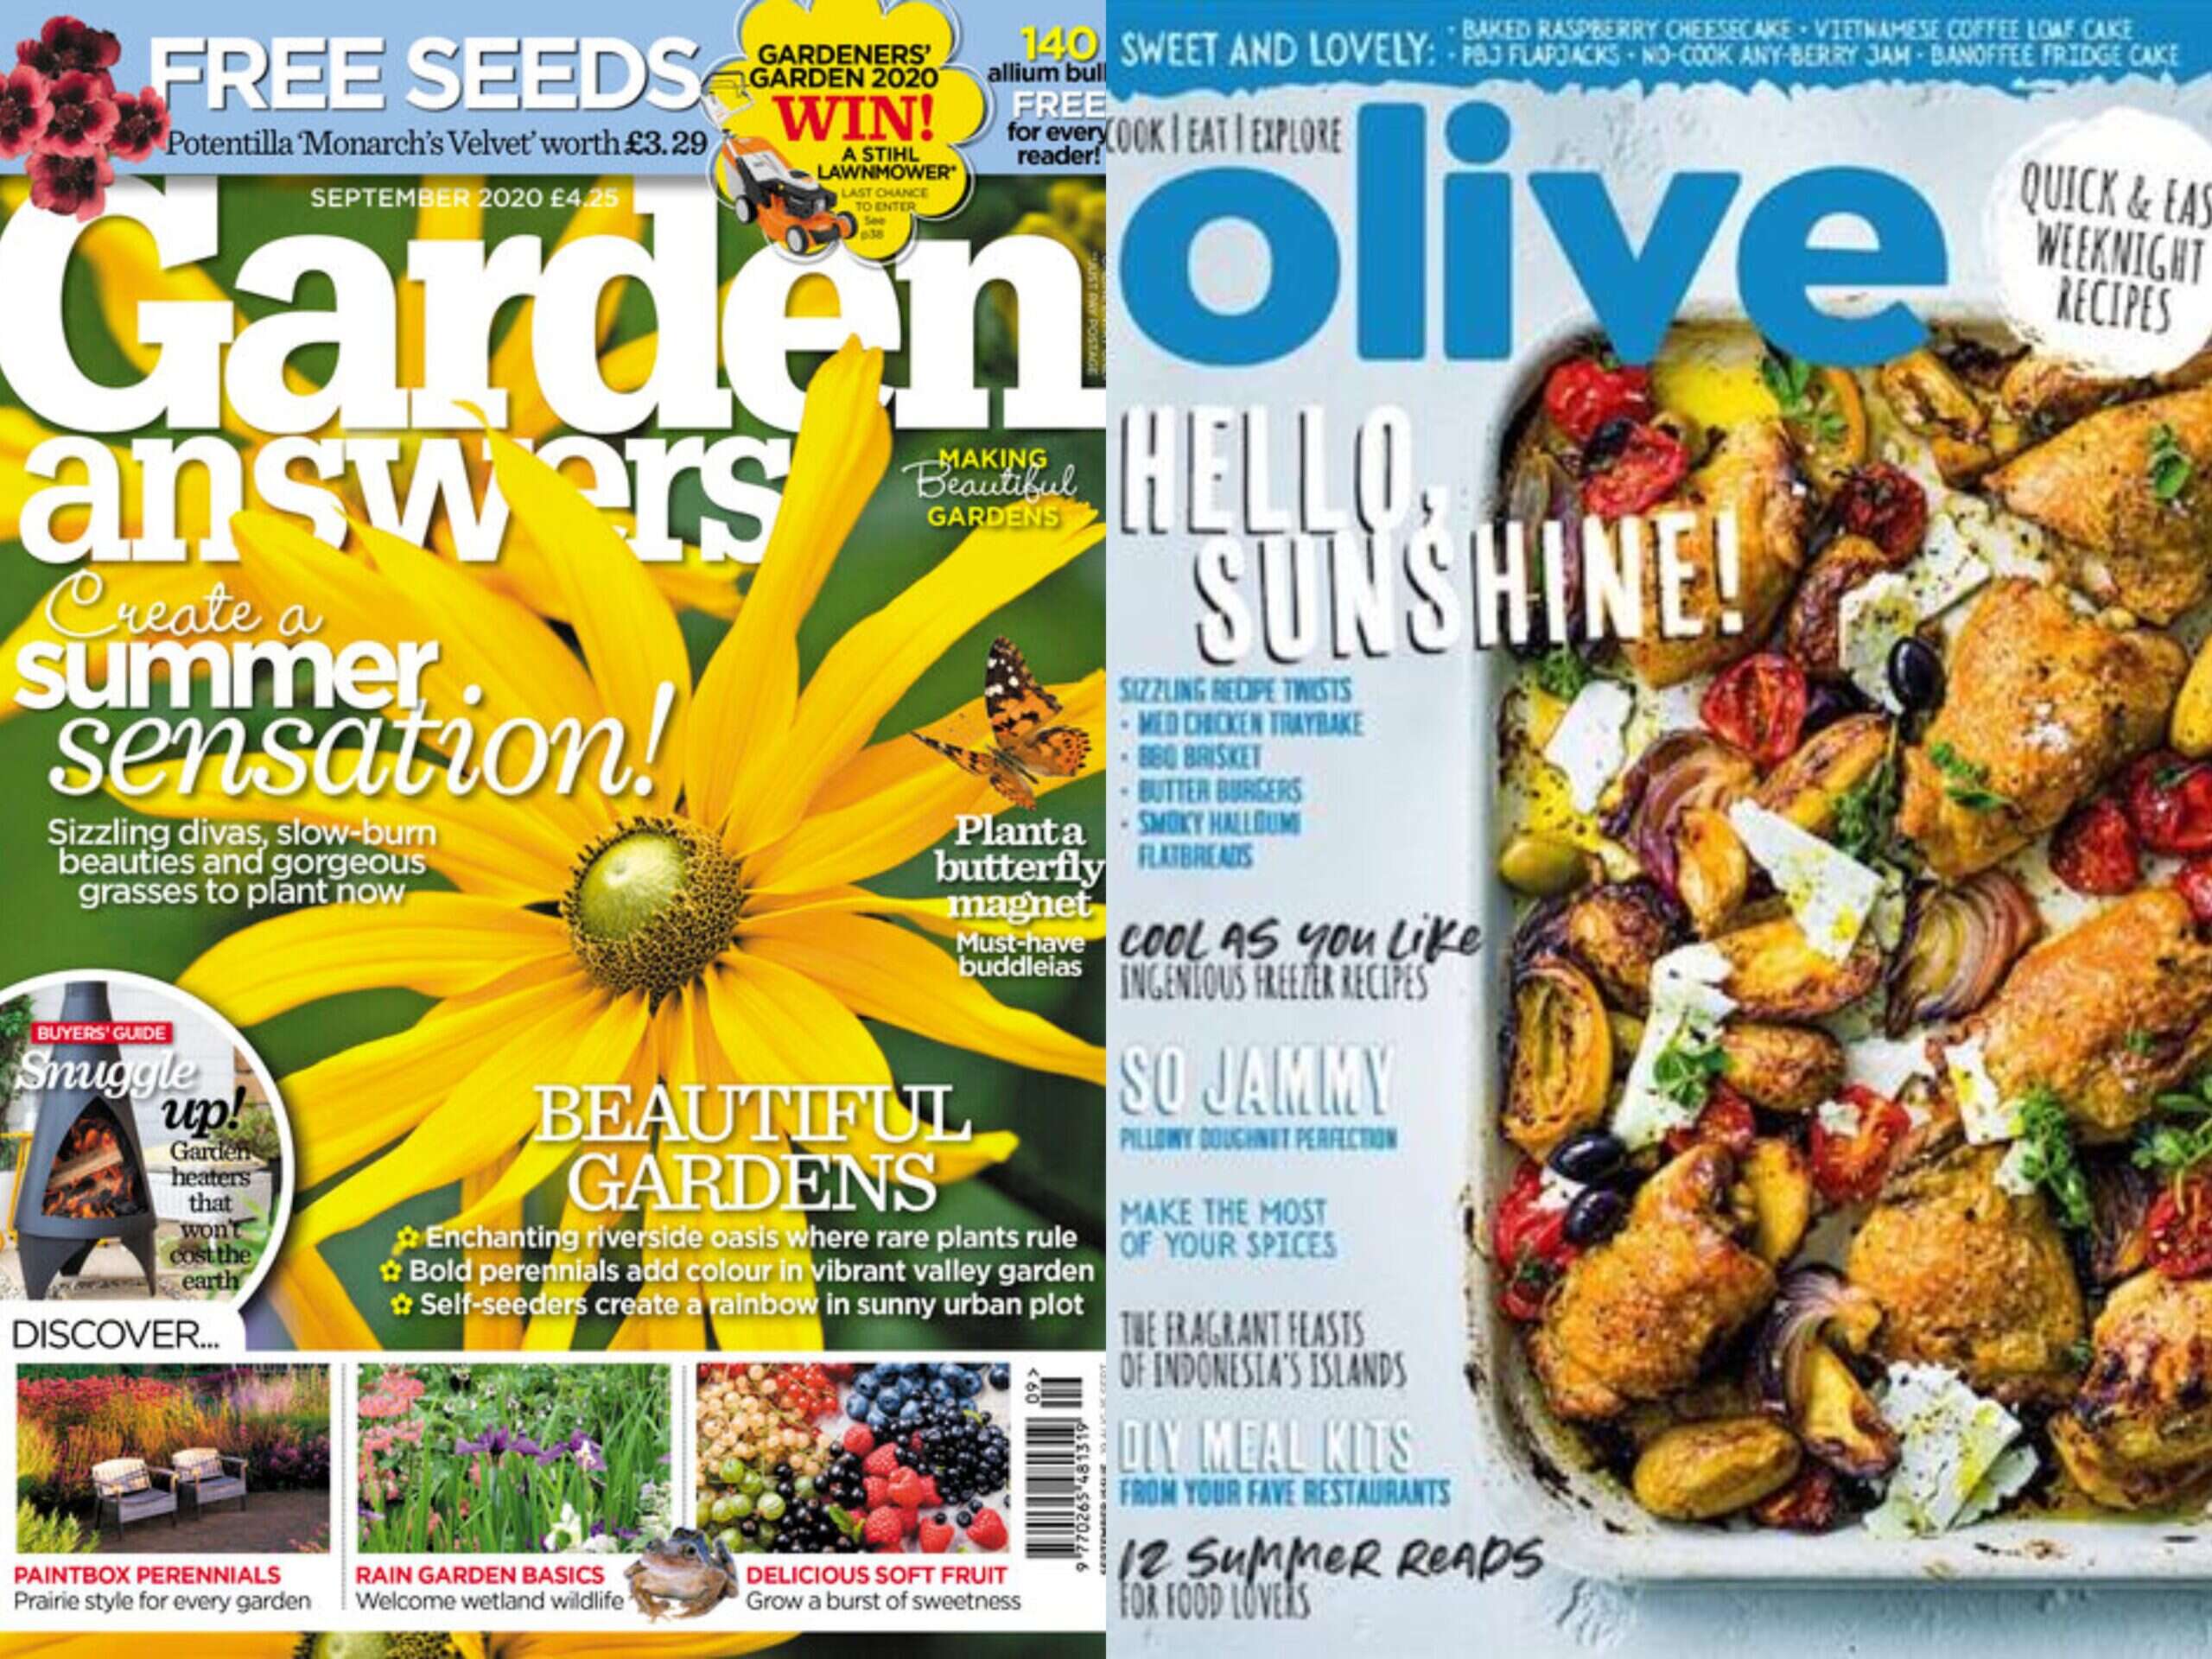 ABCs: Gardening and cooking mags biggest lockdown winners as women's titles see circulation fall